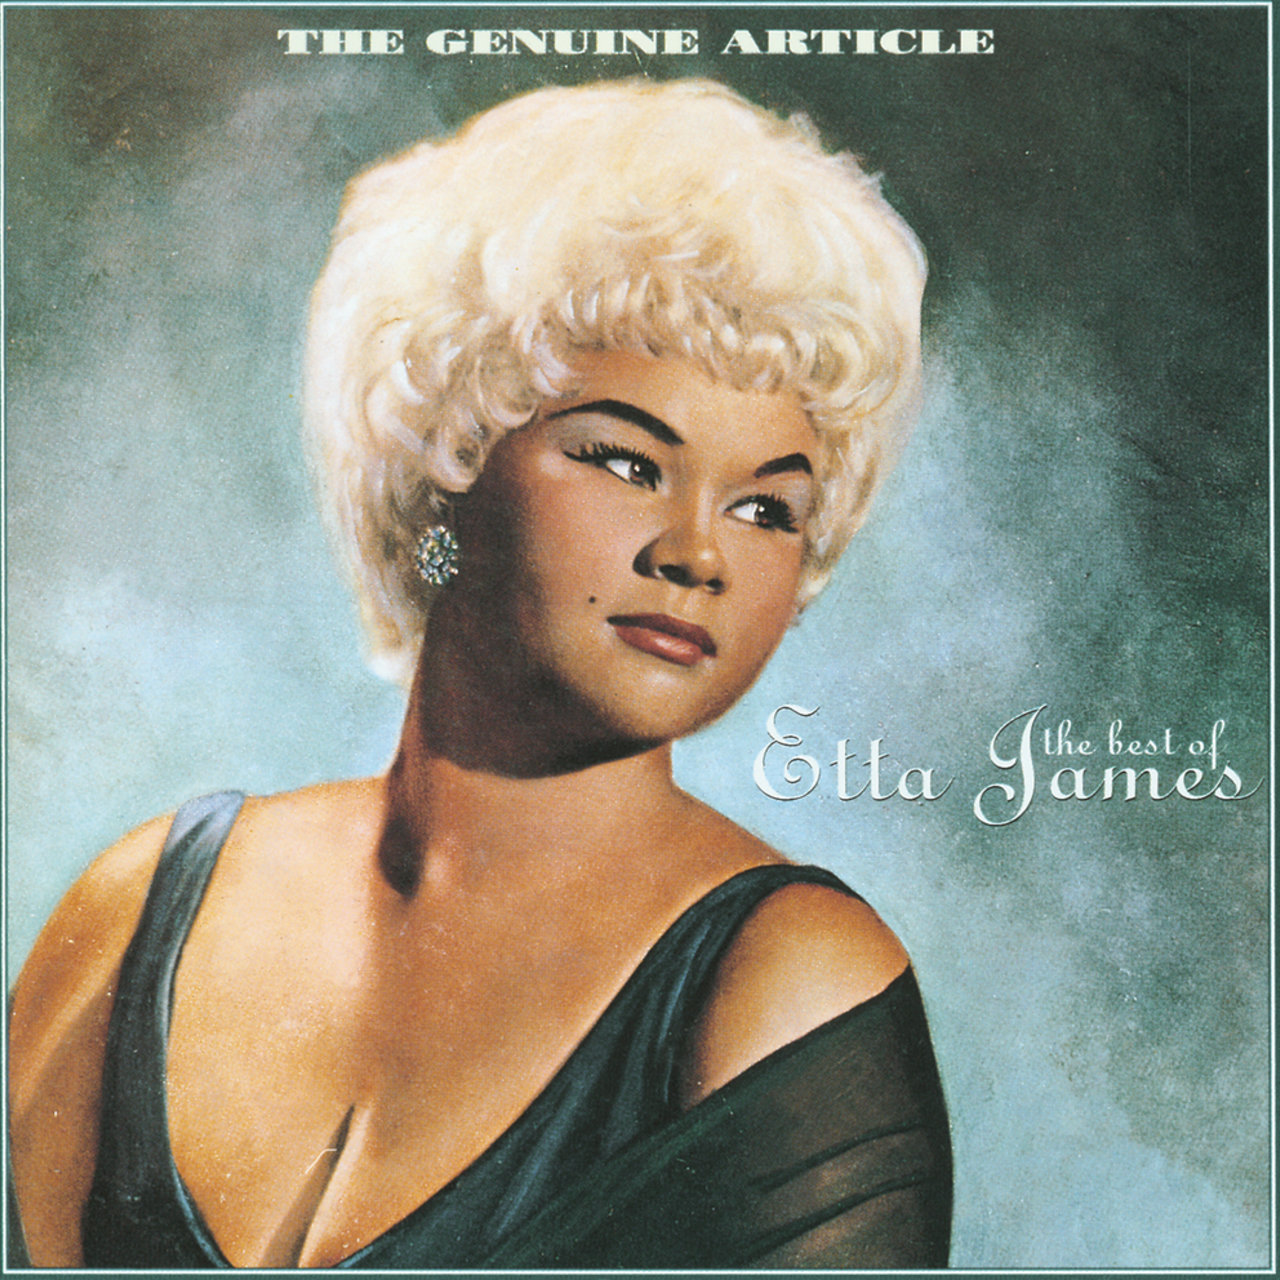 The Genuine Article- The Best Of Etta James [1961]